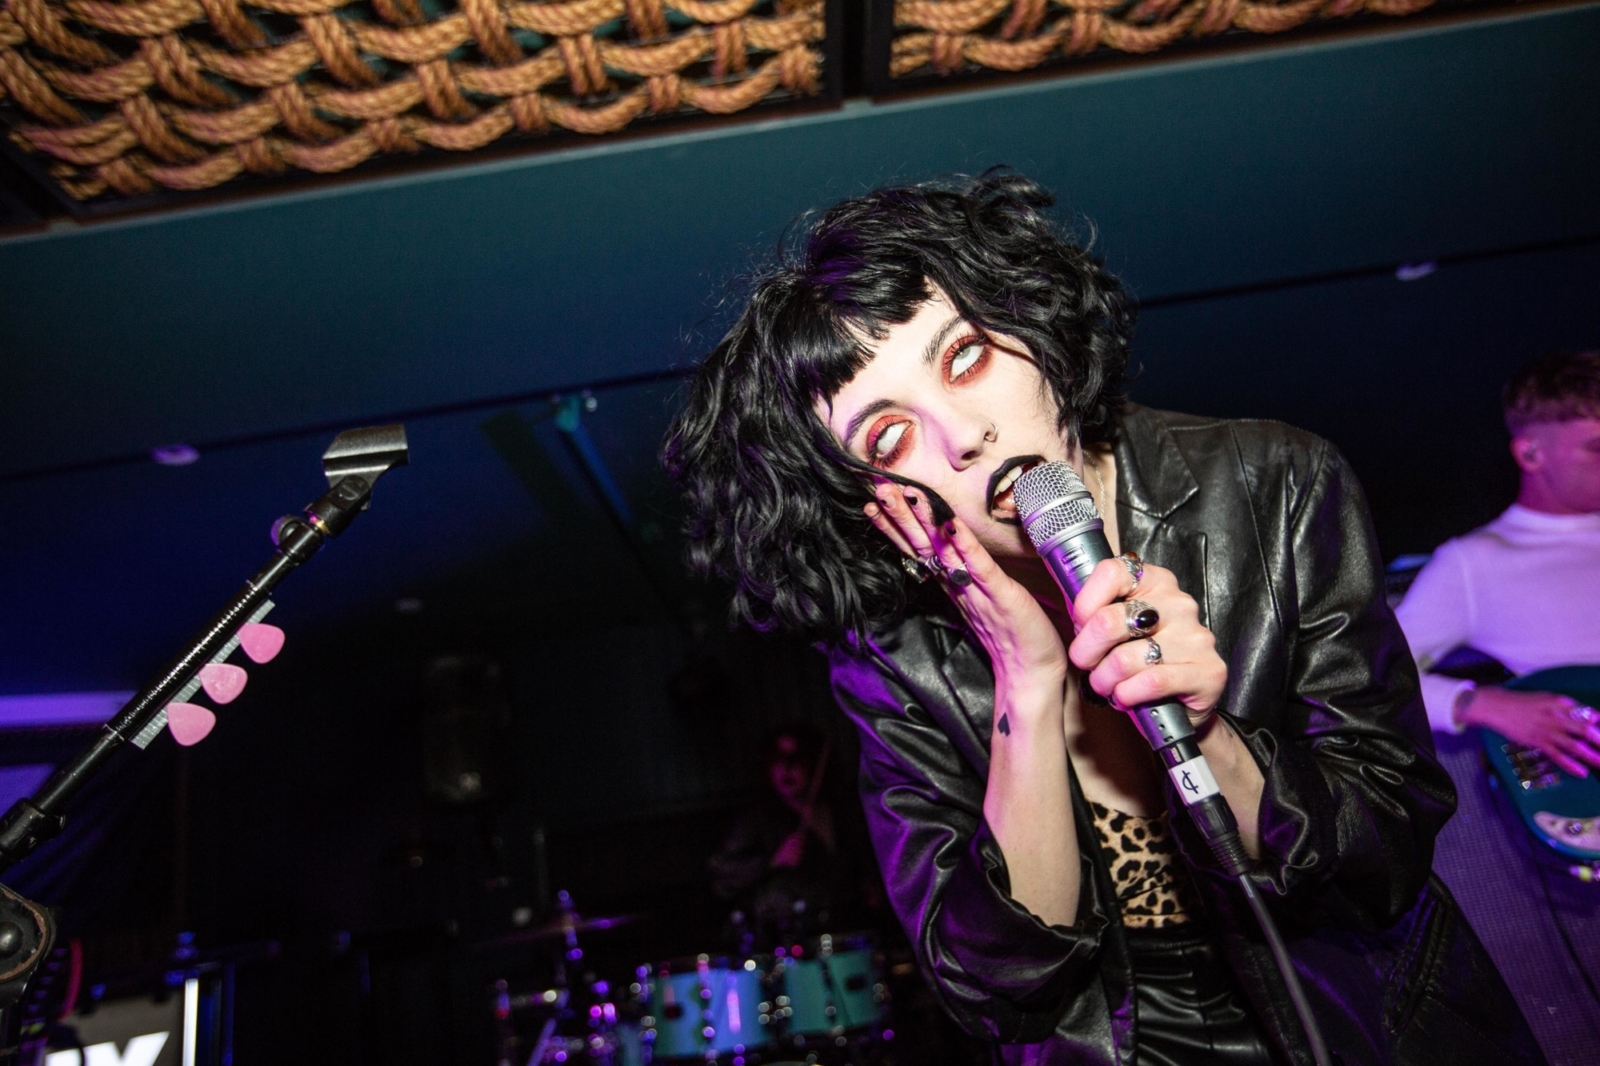 Pale Waves, Snail Mail, Soccer Mommy and more start The Great Escape 2018 with a smash